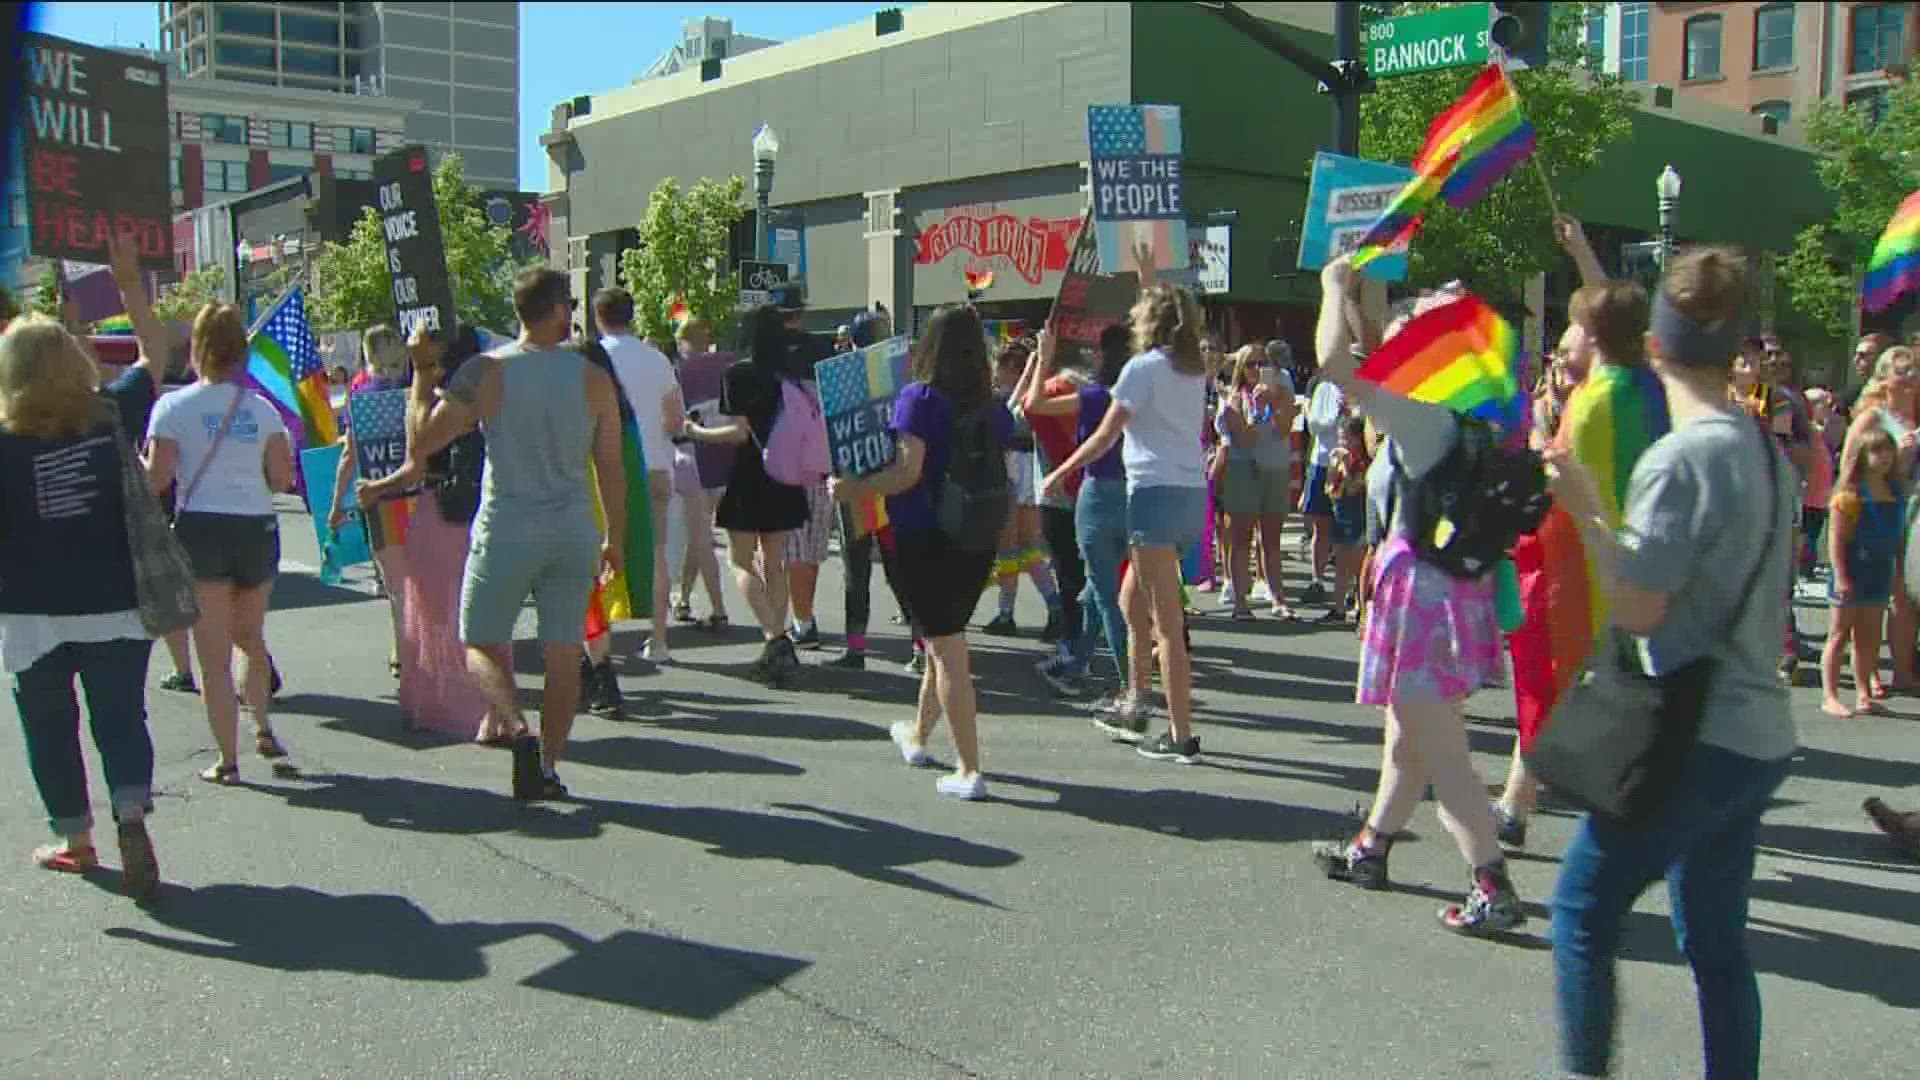 Boise Pride is hosting the festival on the heels of an attempted riot in Idaho where 31 'Patriot Front' members loaded into the back of a U-Haul in Coeur D'Alene.